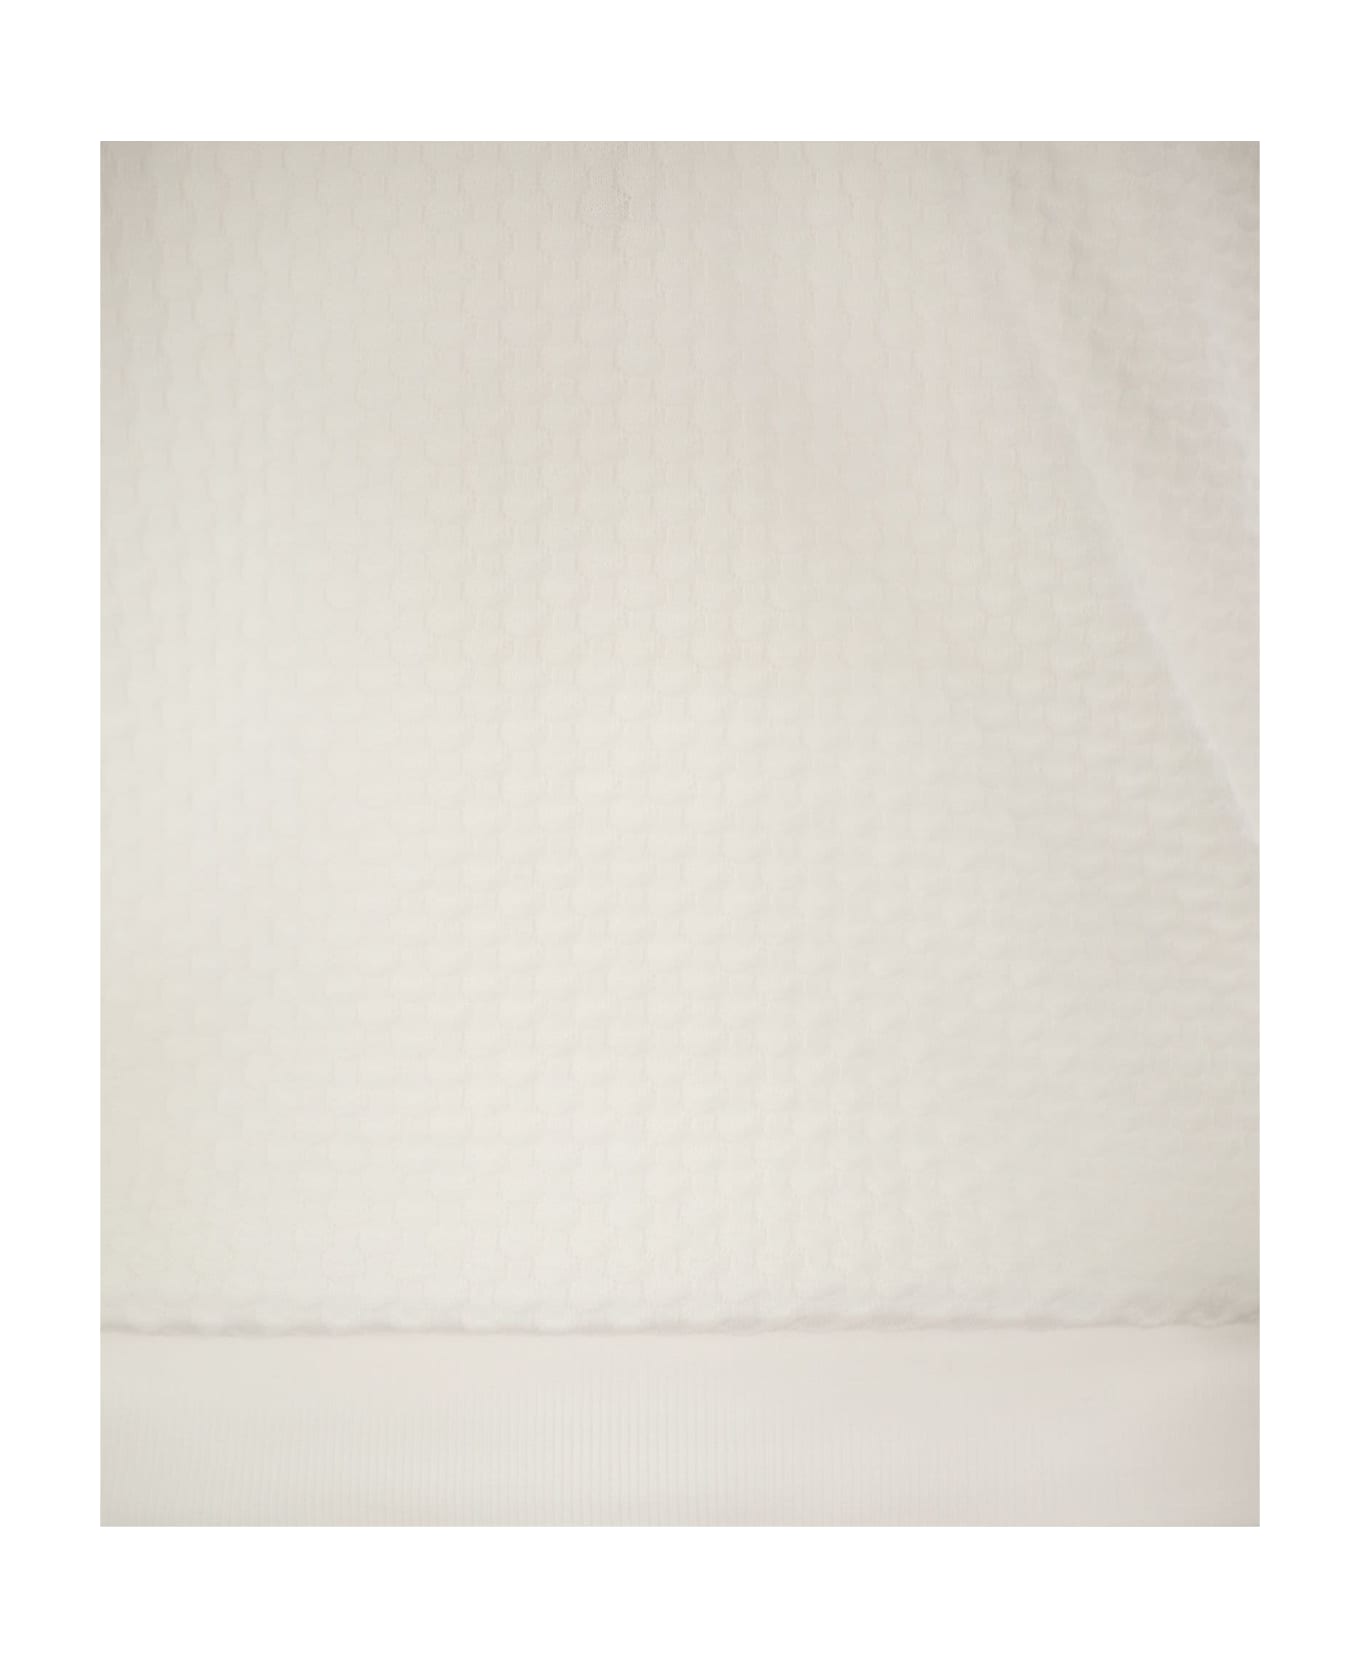 Tagliatore Knitted Cotton Polo Shirt - White ポロシャツ